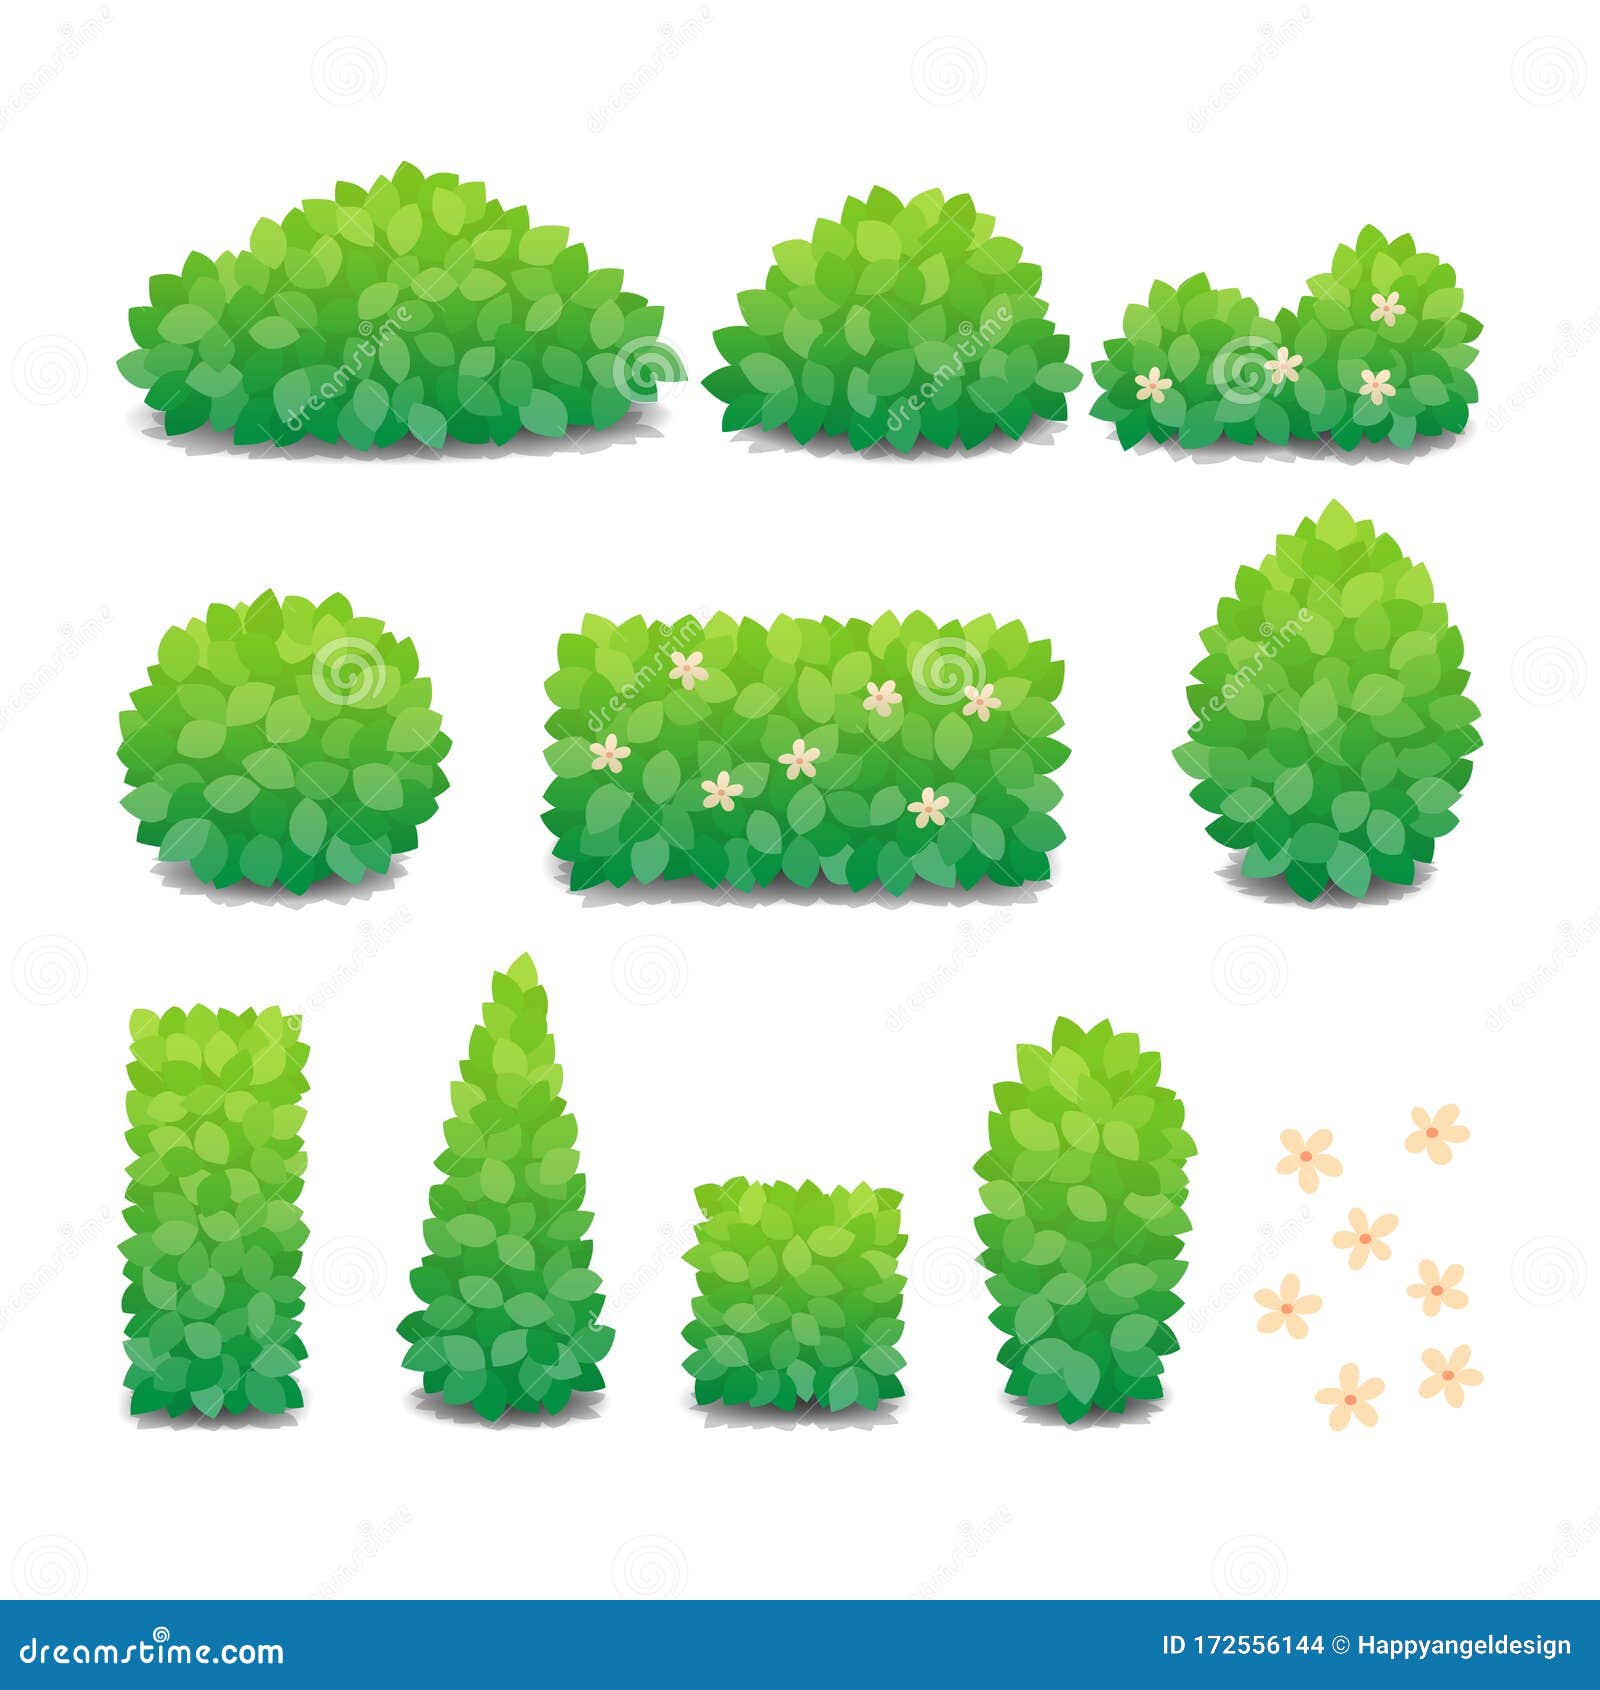 collection of green bushes with flowers  on white background.